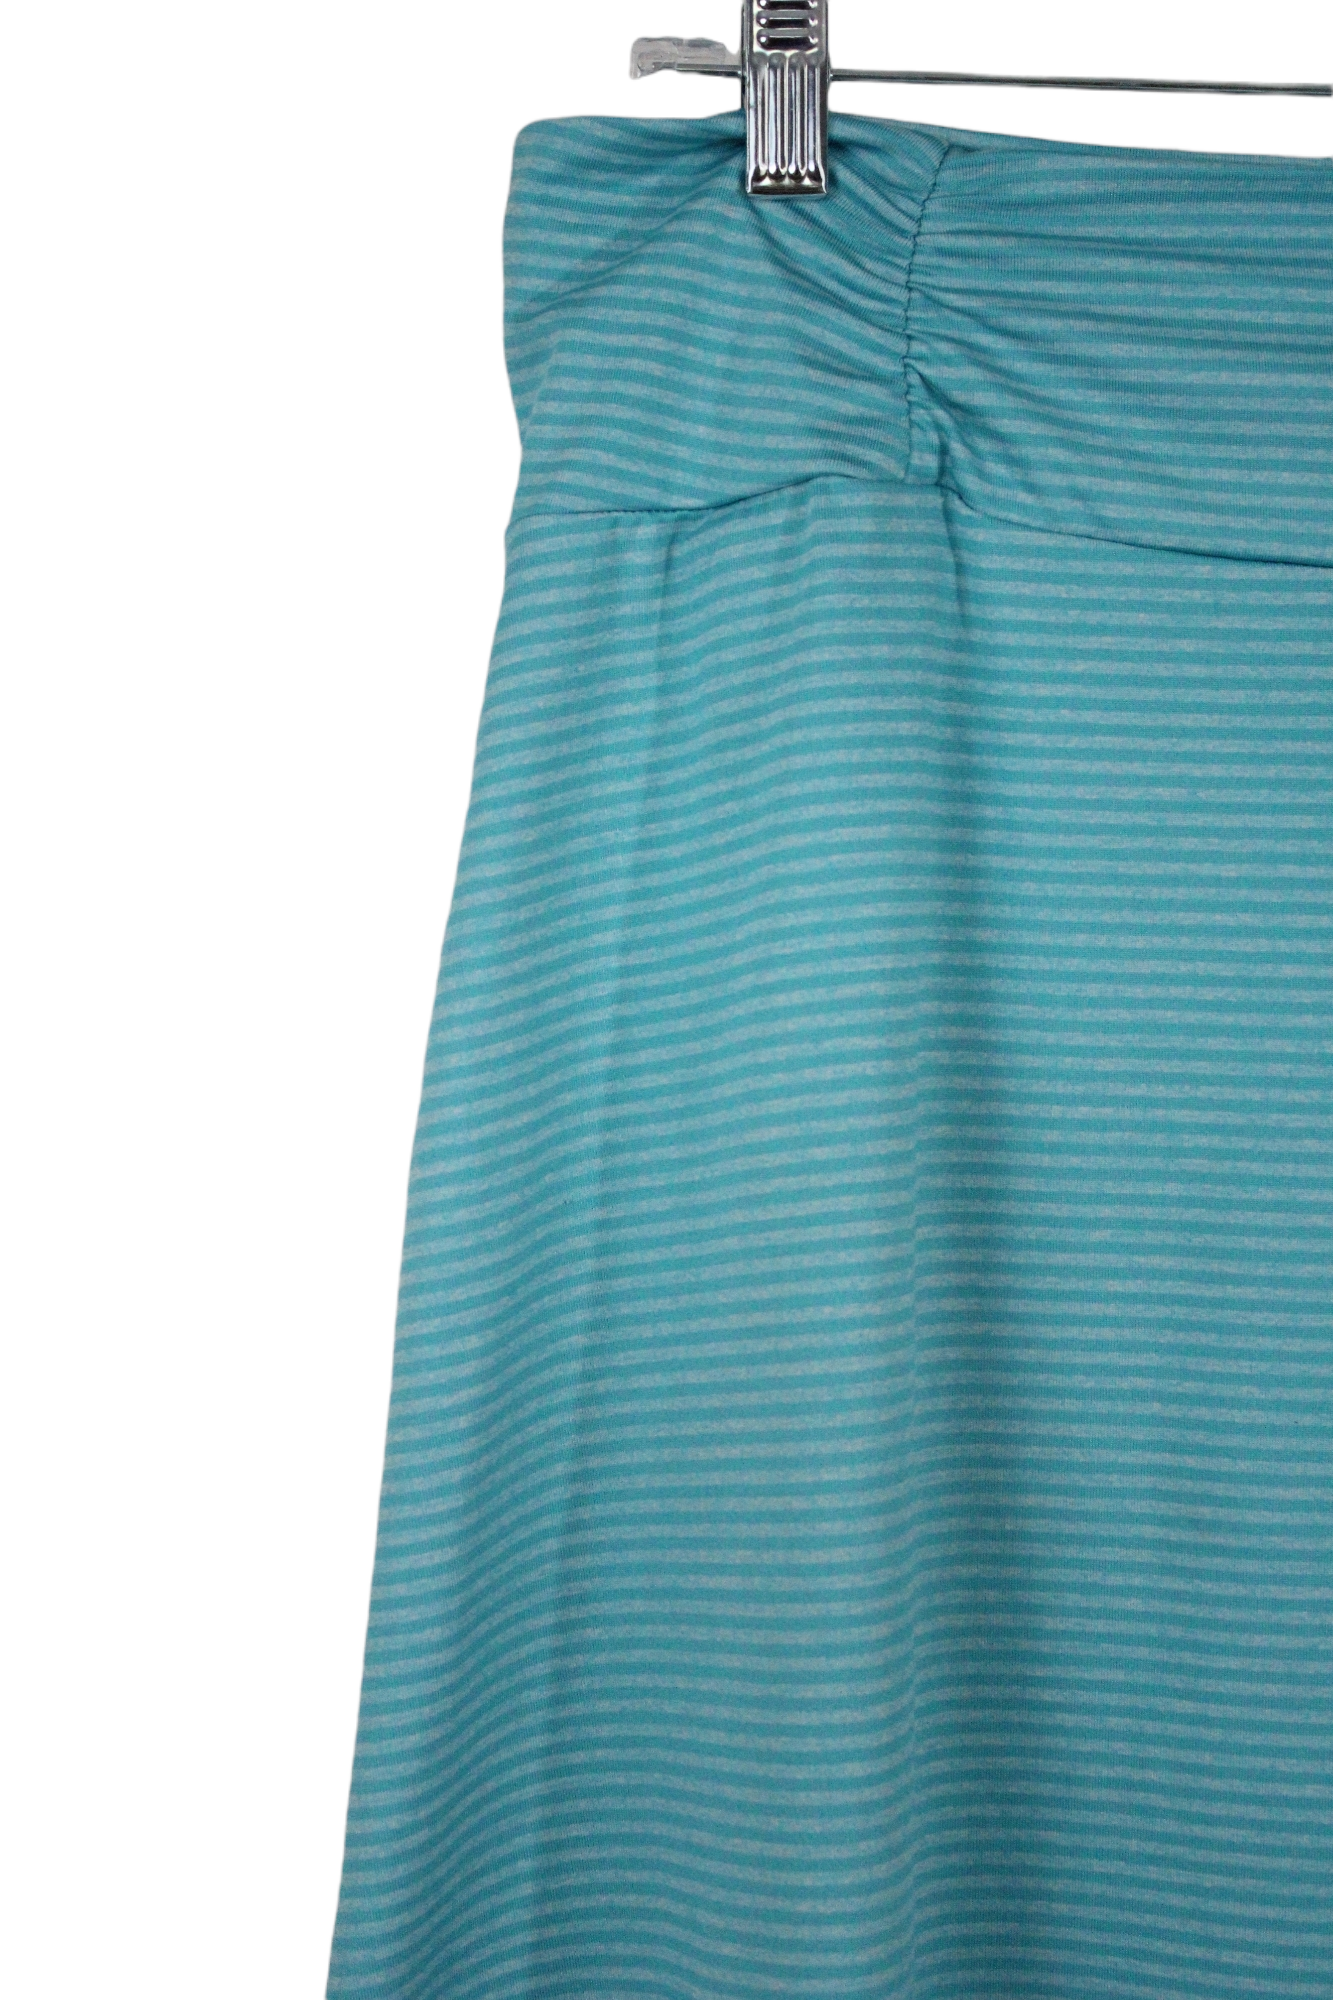 Tranquility Blue Striped Skirt | L